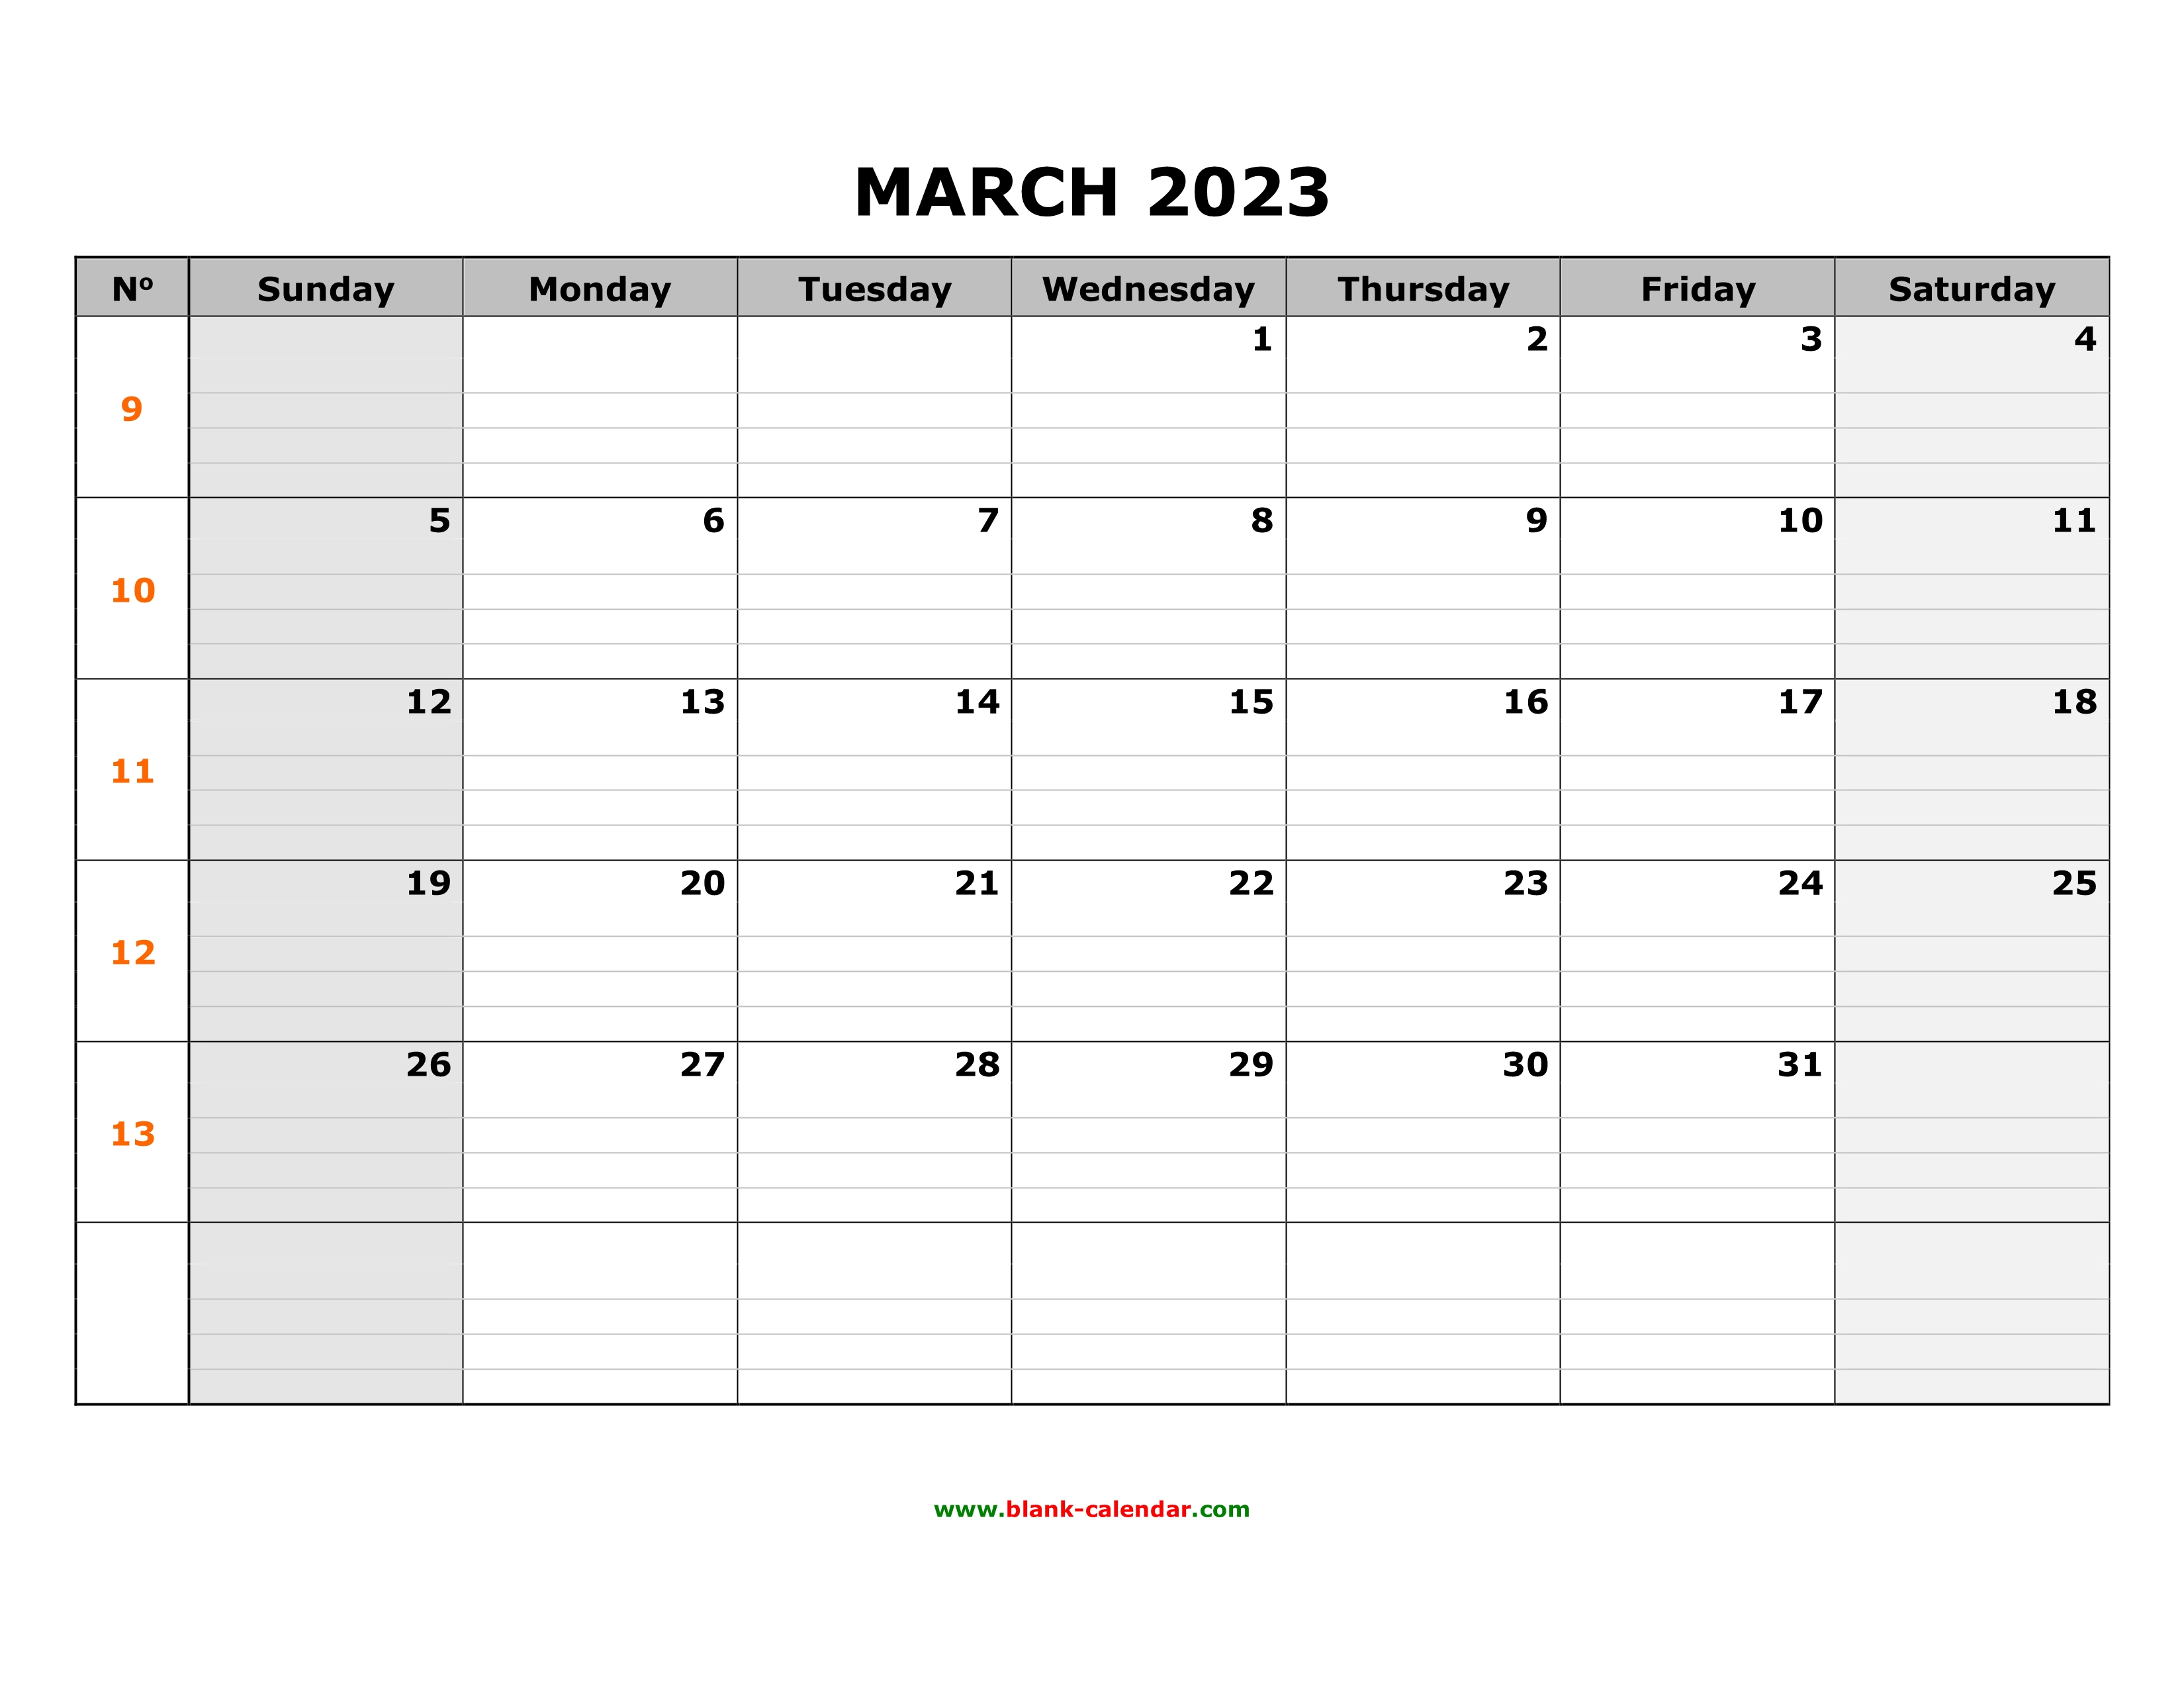 Free Download Printable March 2023 Calendar Large Box Grid Space For